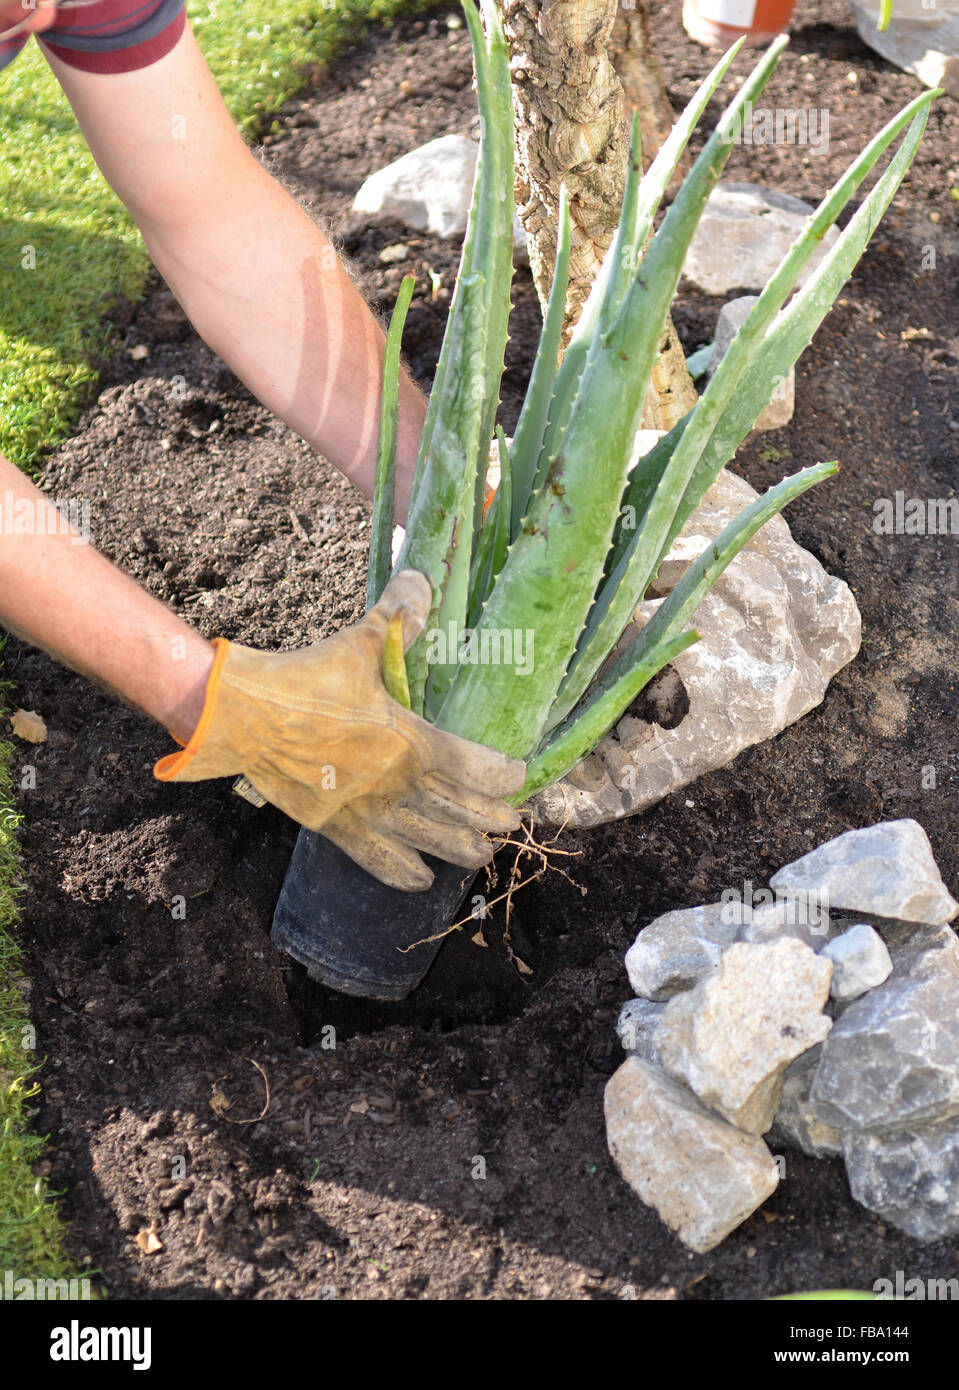 Gloved hands planting an aloe plant in a hole Stock Photo